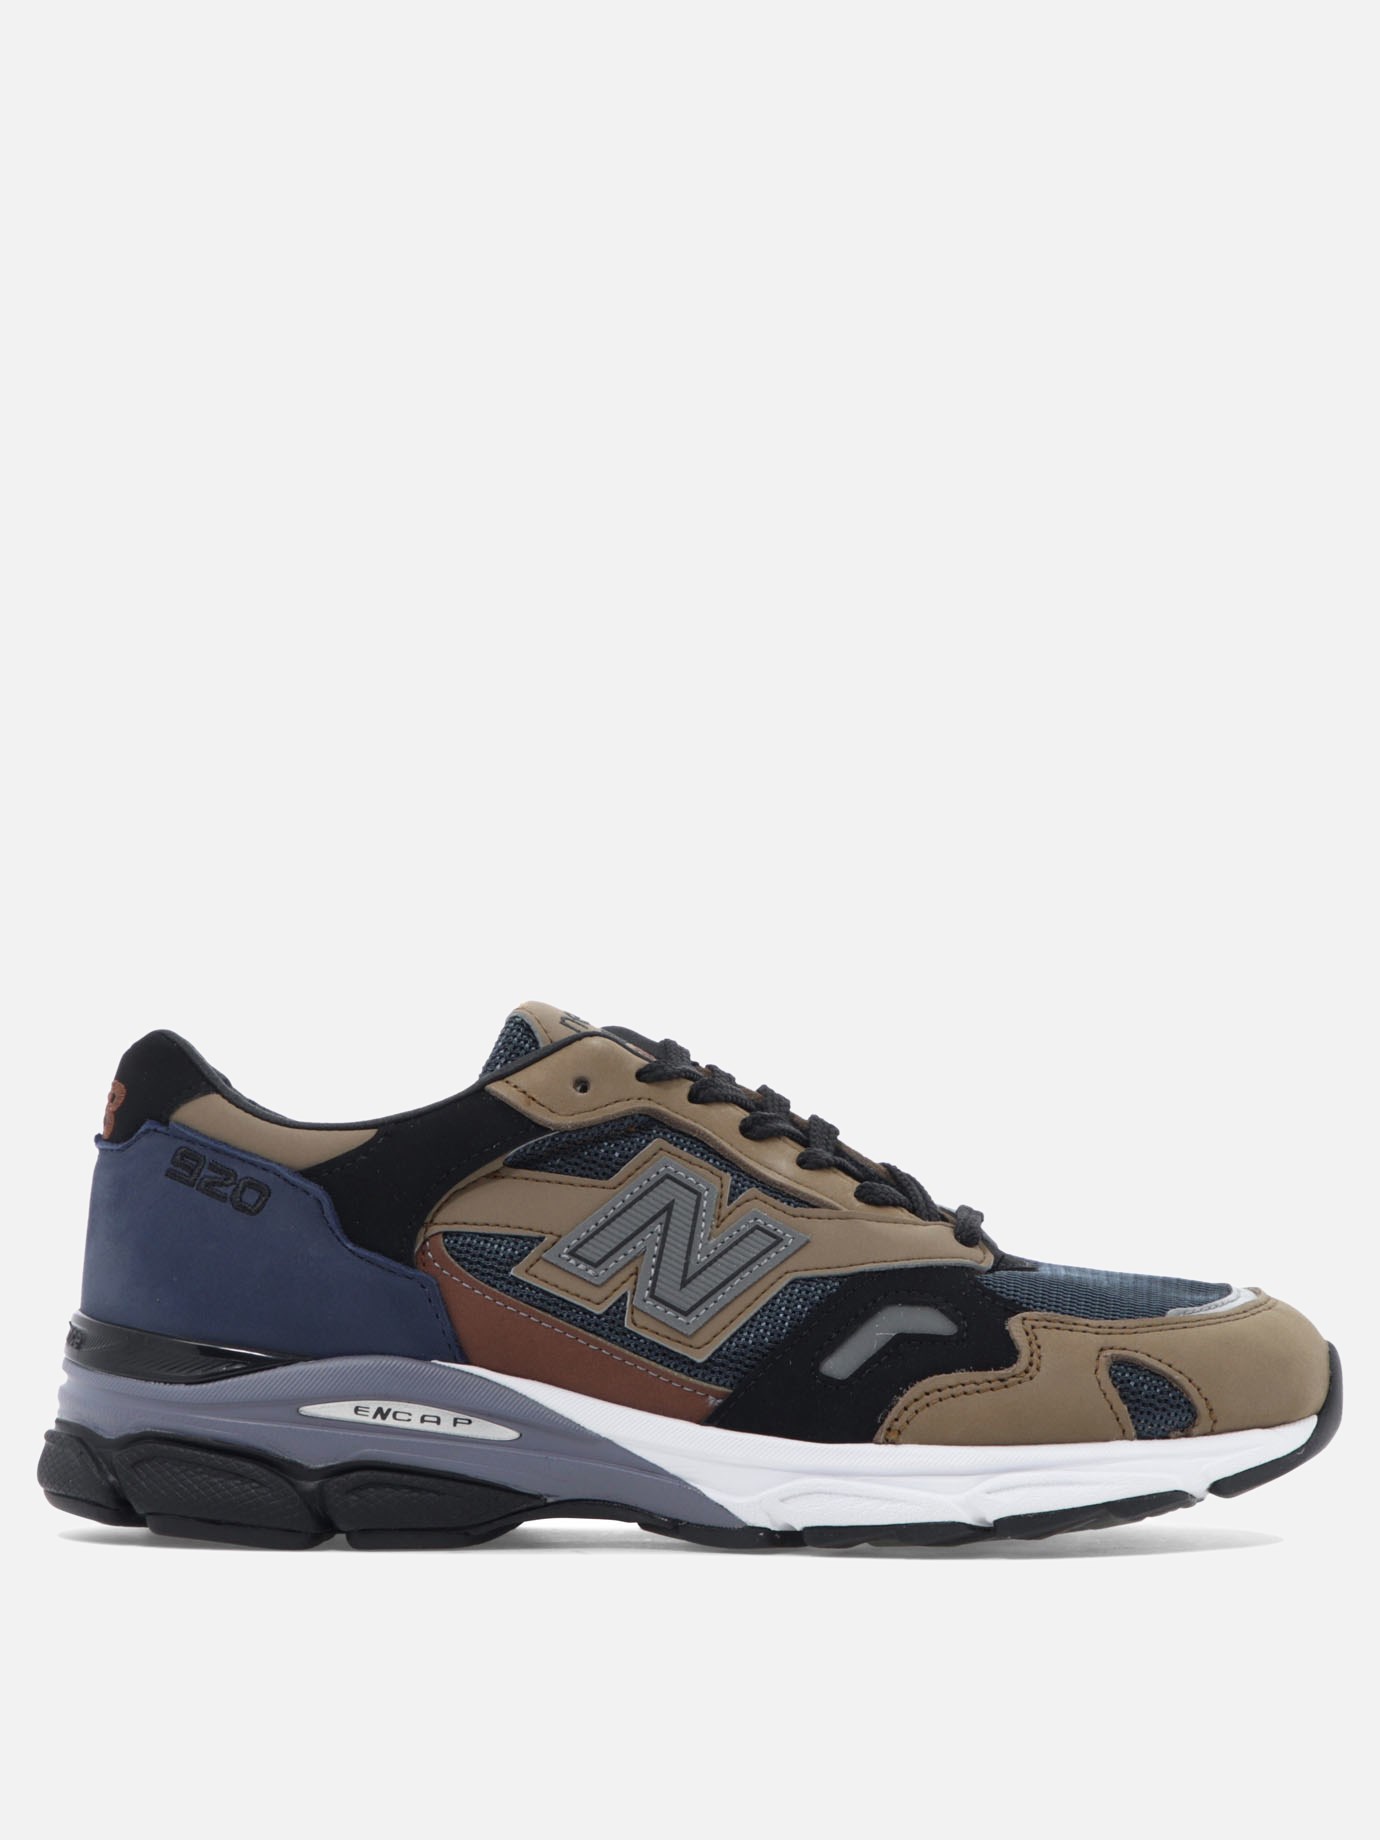 Sneaker  Made in UK 920 by New Balance - 4